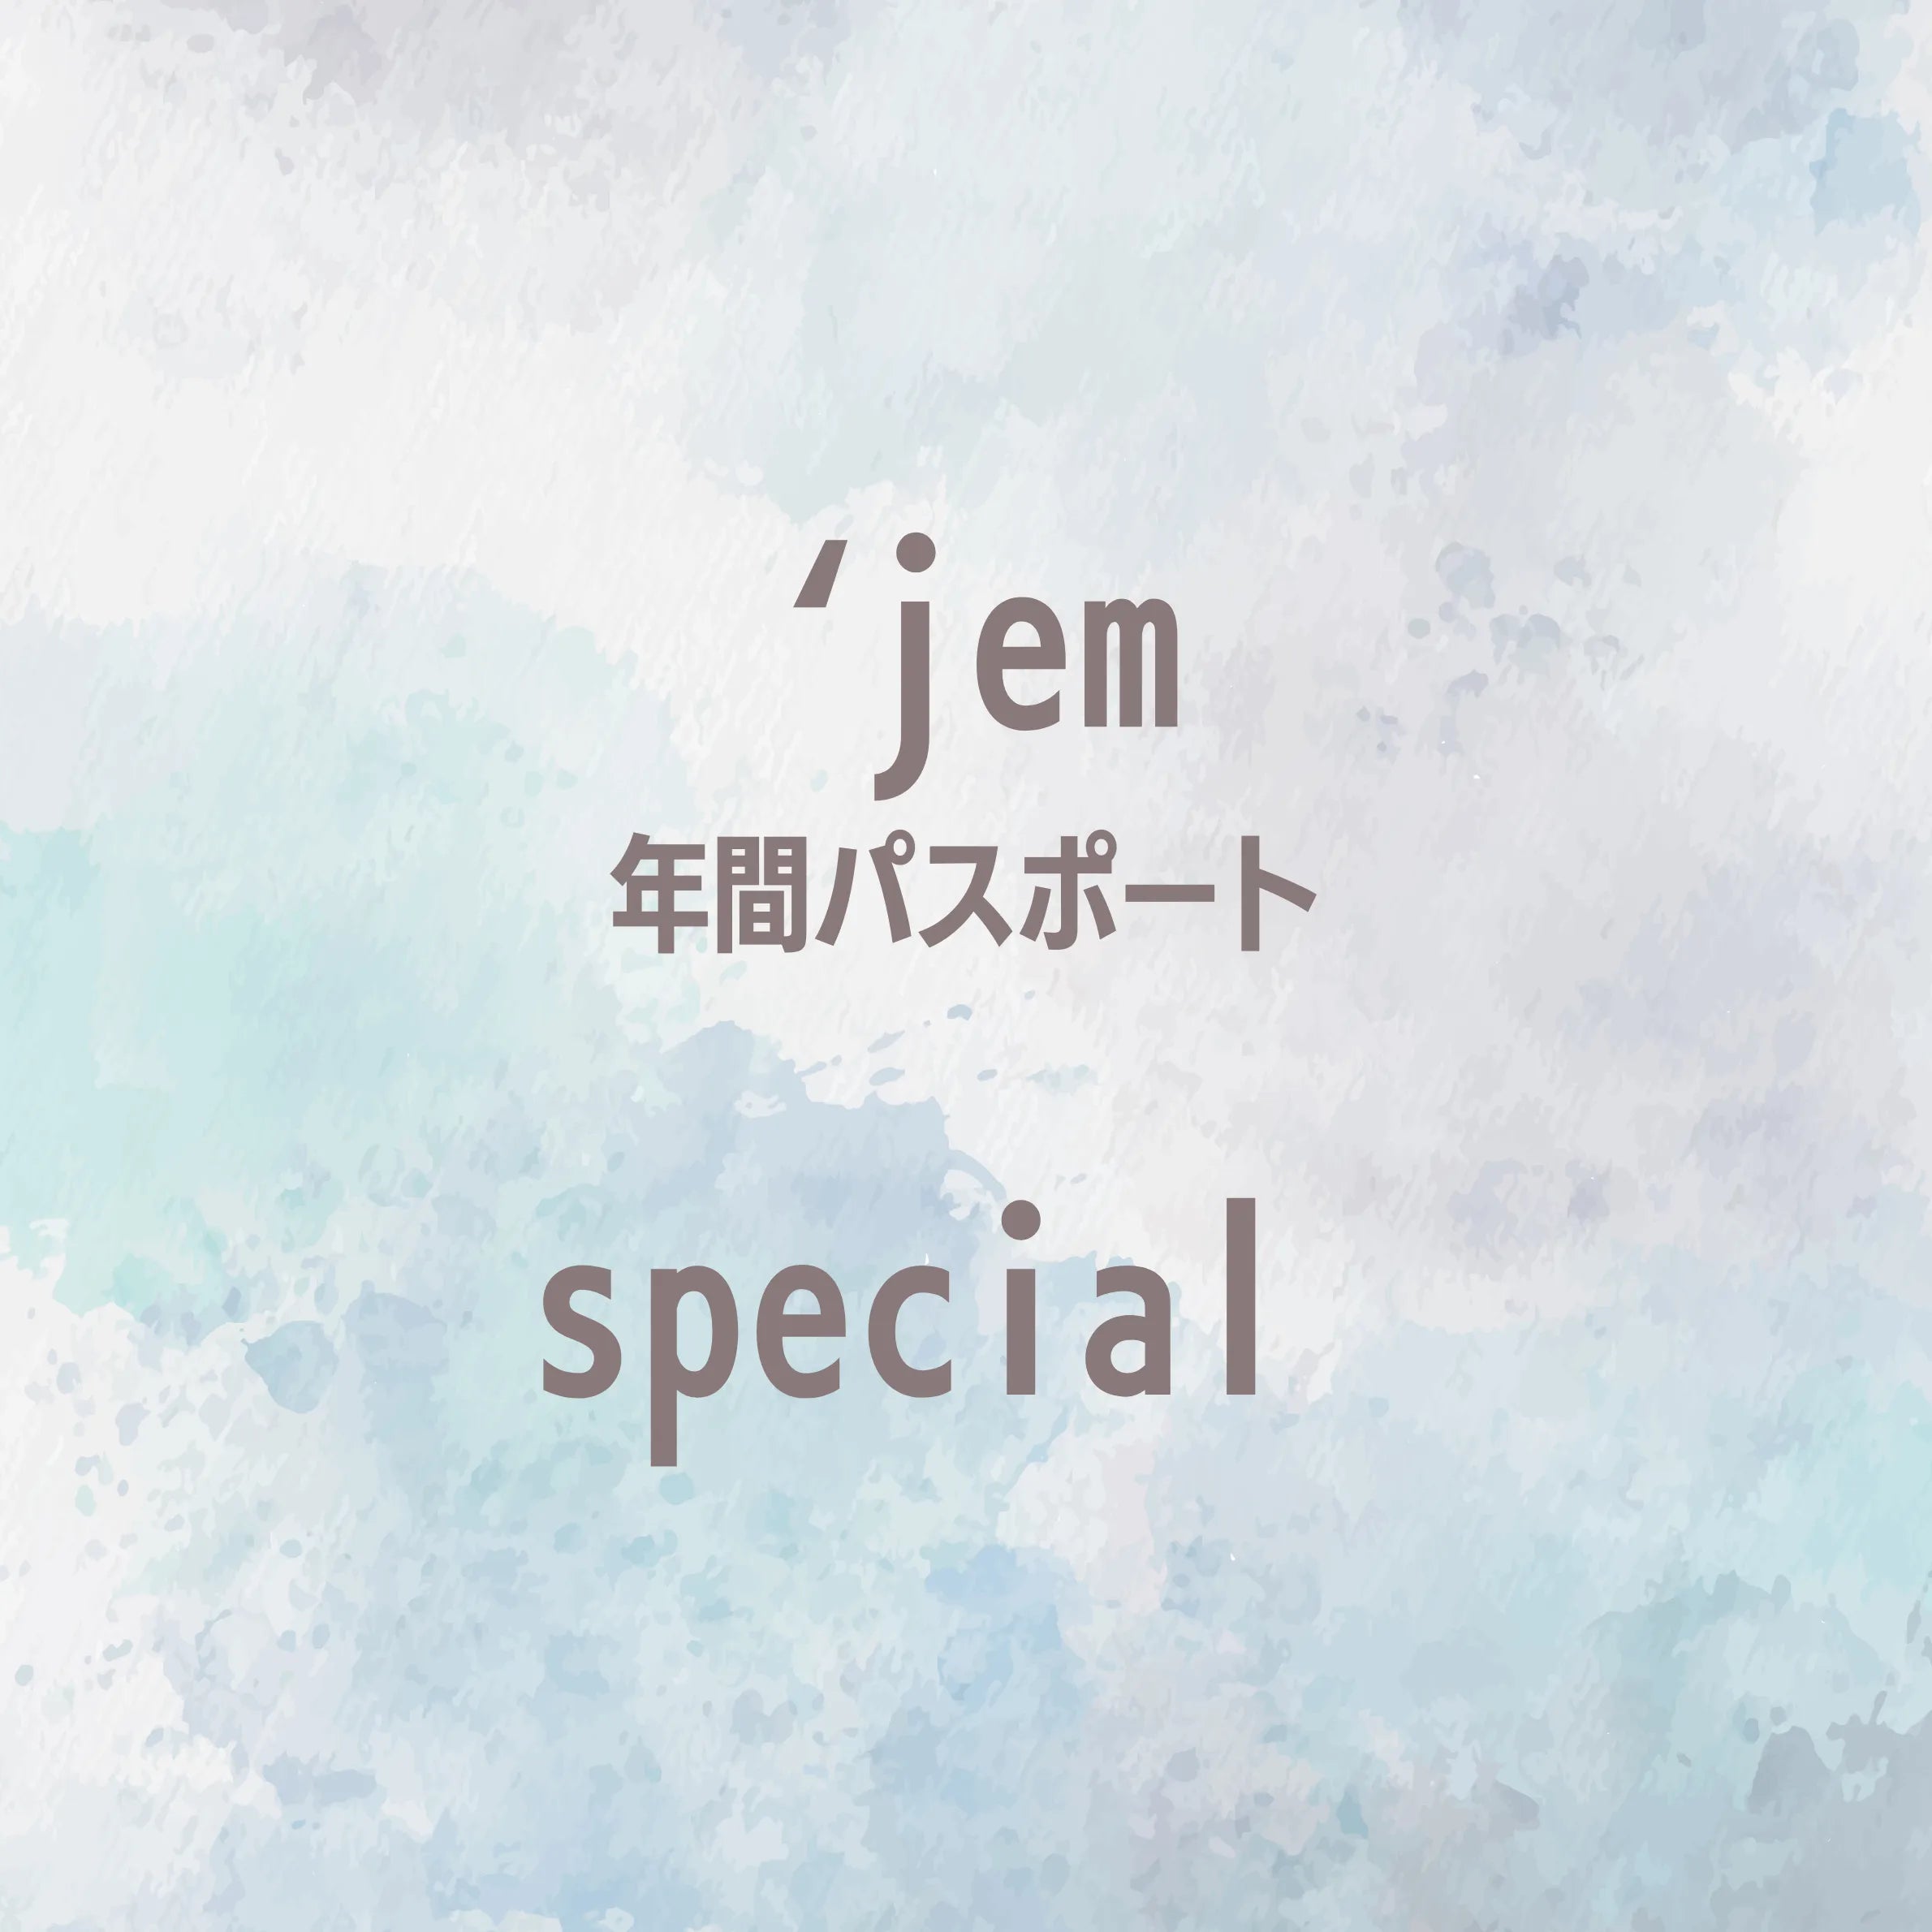 【`jem年間パスポート】special